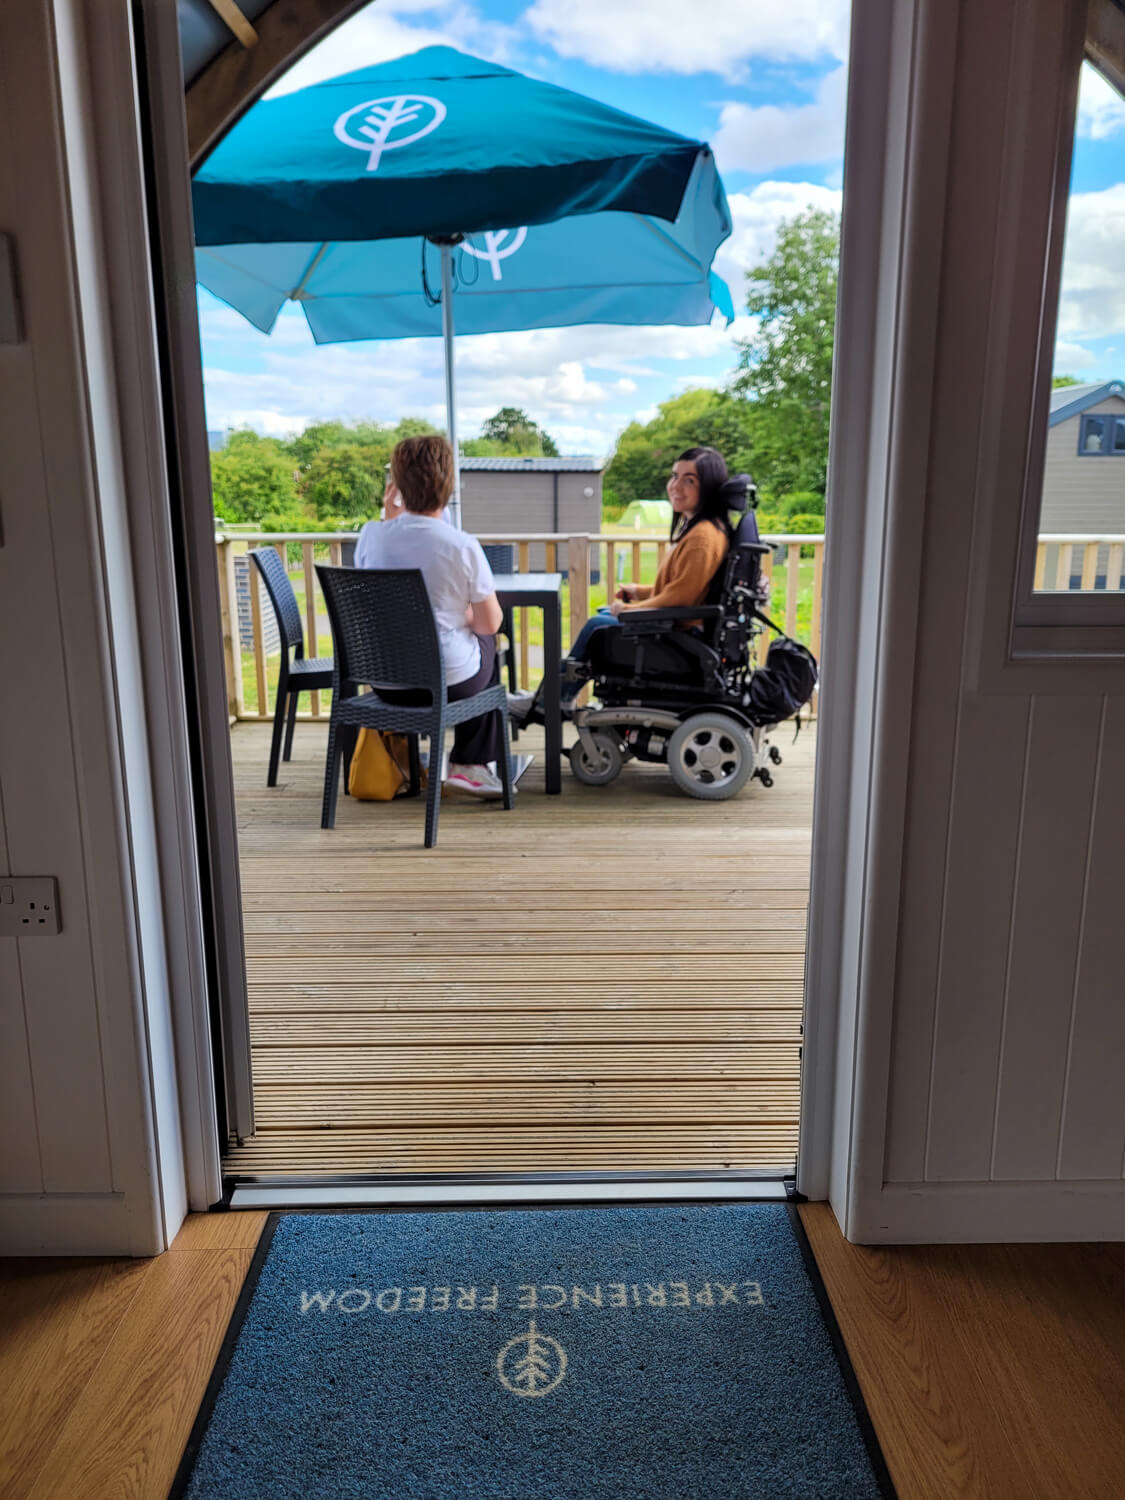 Emma sat at the outdoor dining table on the decking with her mum. A blue parasol is above them. Emma is looking over her shoulder and smiling at the camera.